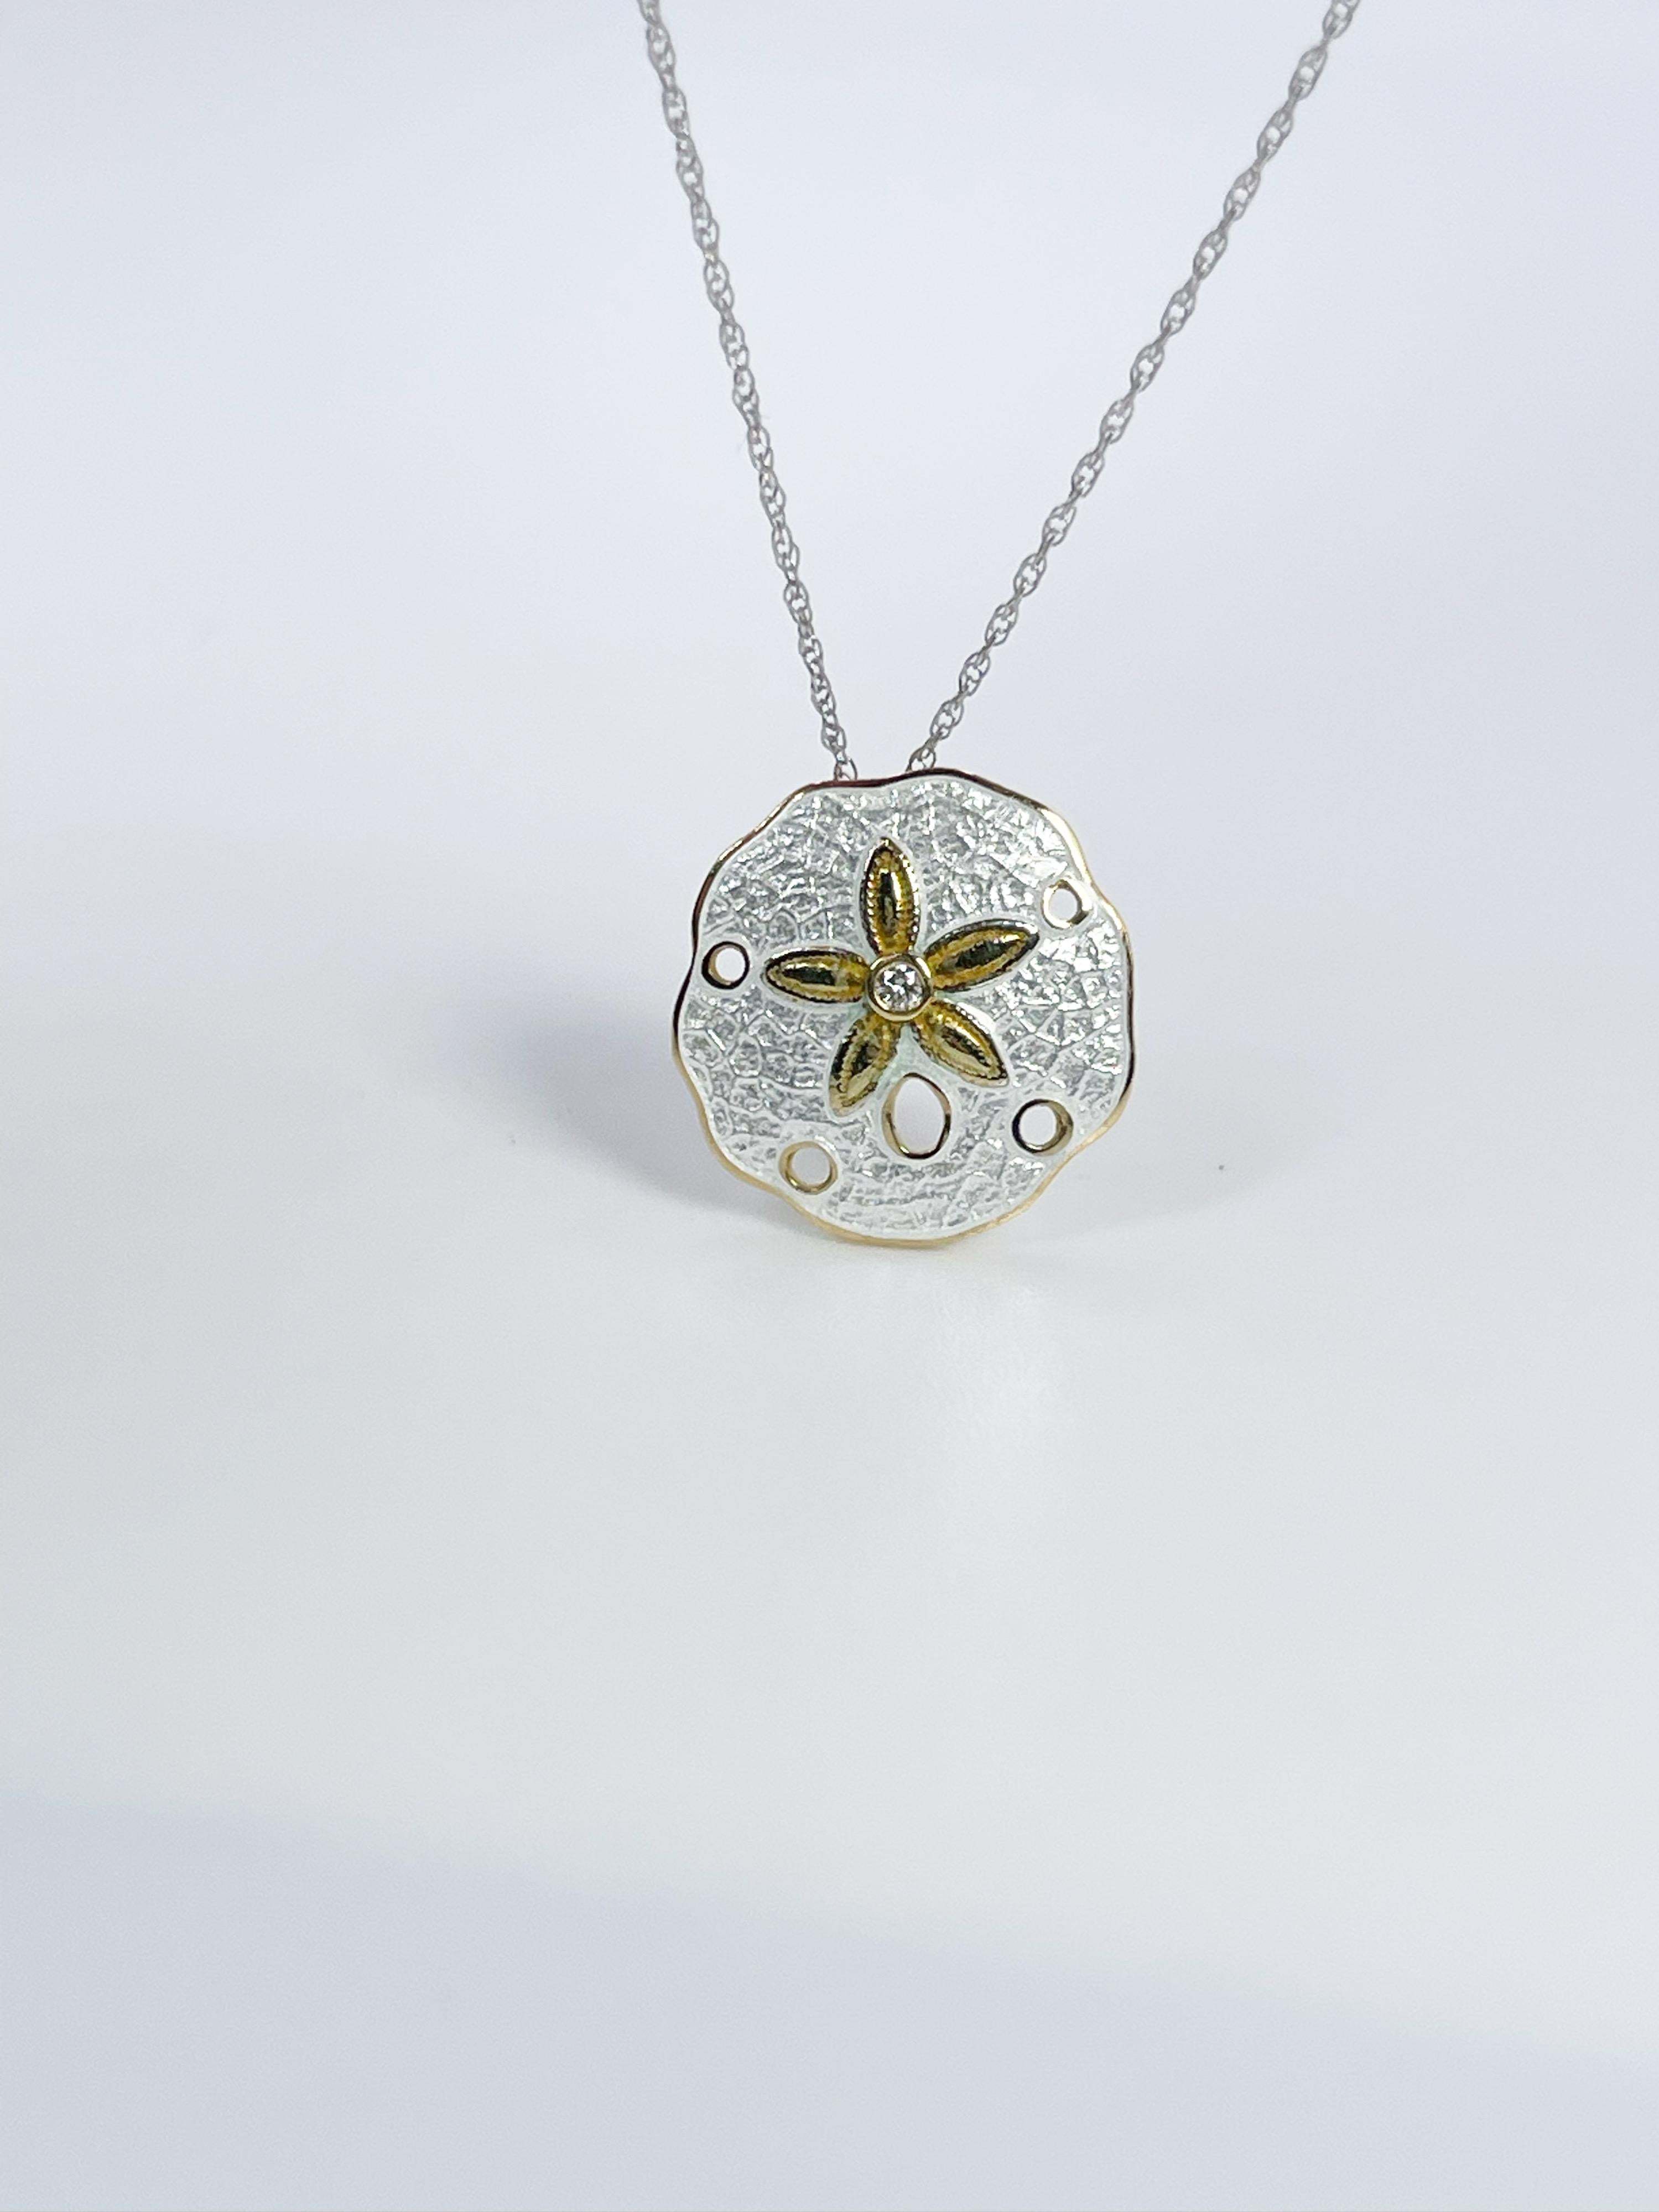 Exquisite and rare vitreous white enamel pendant in 18KT yellow gold accompanied by a center diamond 1.8mm.

GRAM WEIGHT (pendant only): 1.90gr
GOLD: 18KT yellow gold
CHAIN: 18